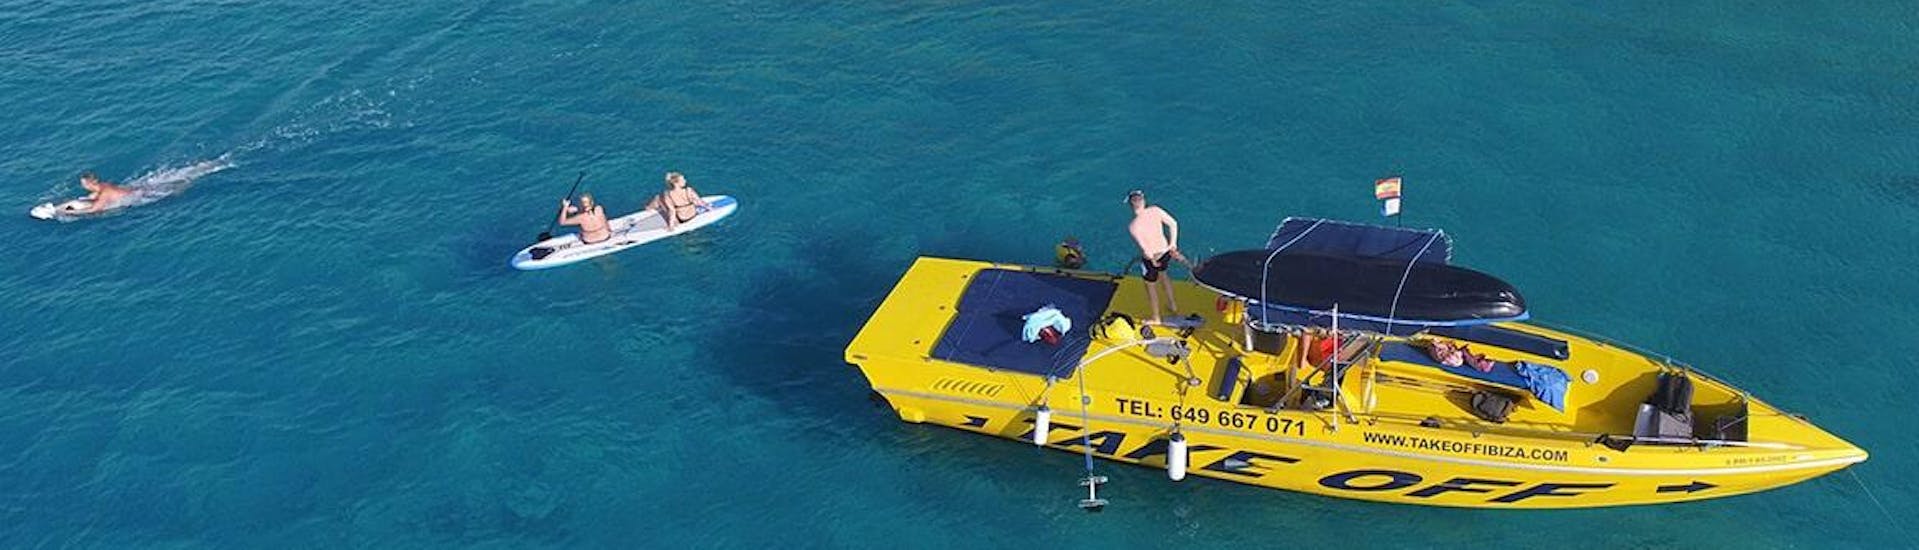 A luxury water toy boat excursion takes place in Ibiza with Take Off Ibiza.